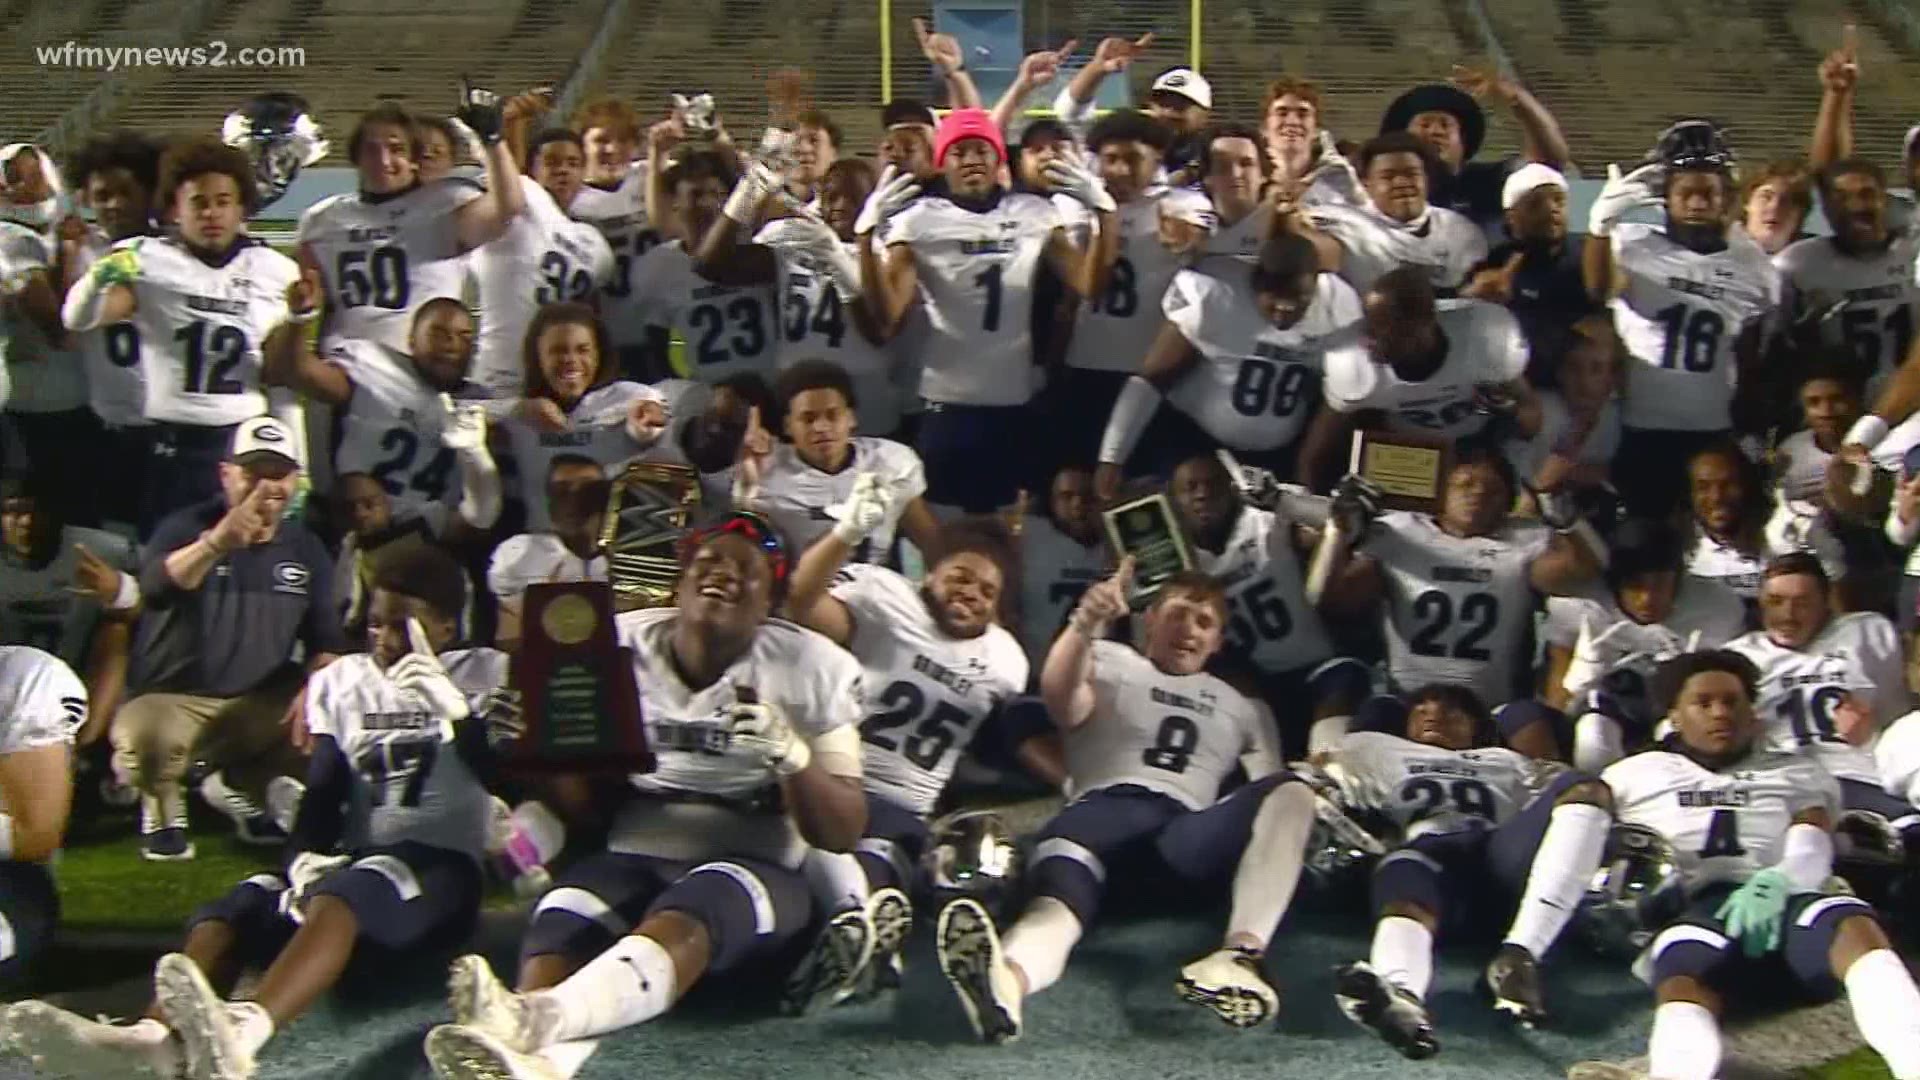 Grimsley won its first football title in 61 years. Seniors on the team reflected on the historic moment for their school.